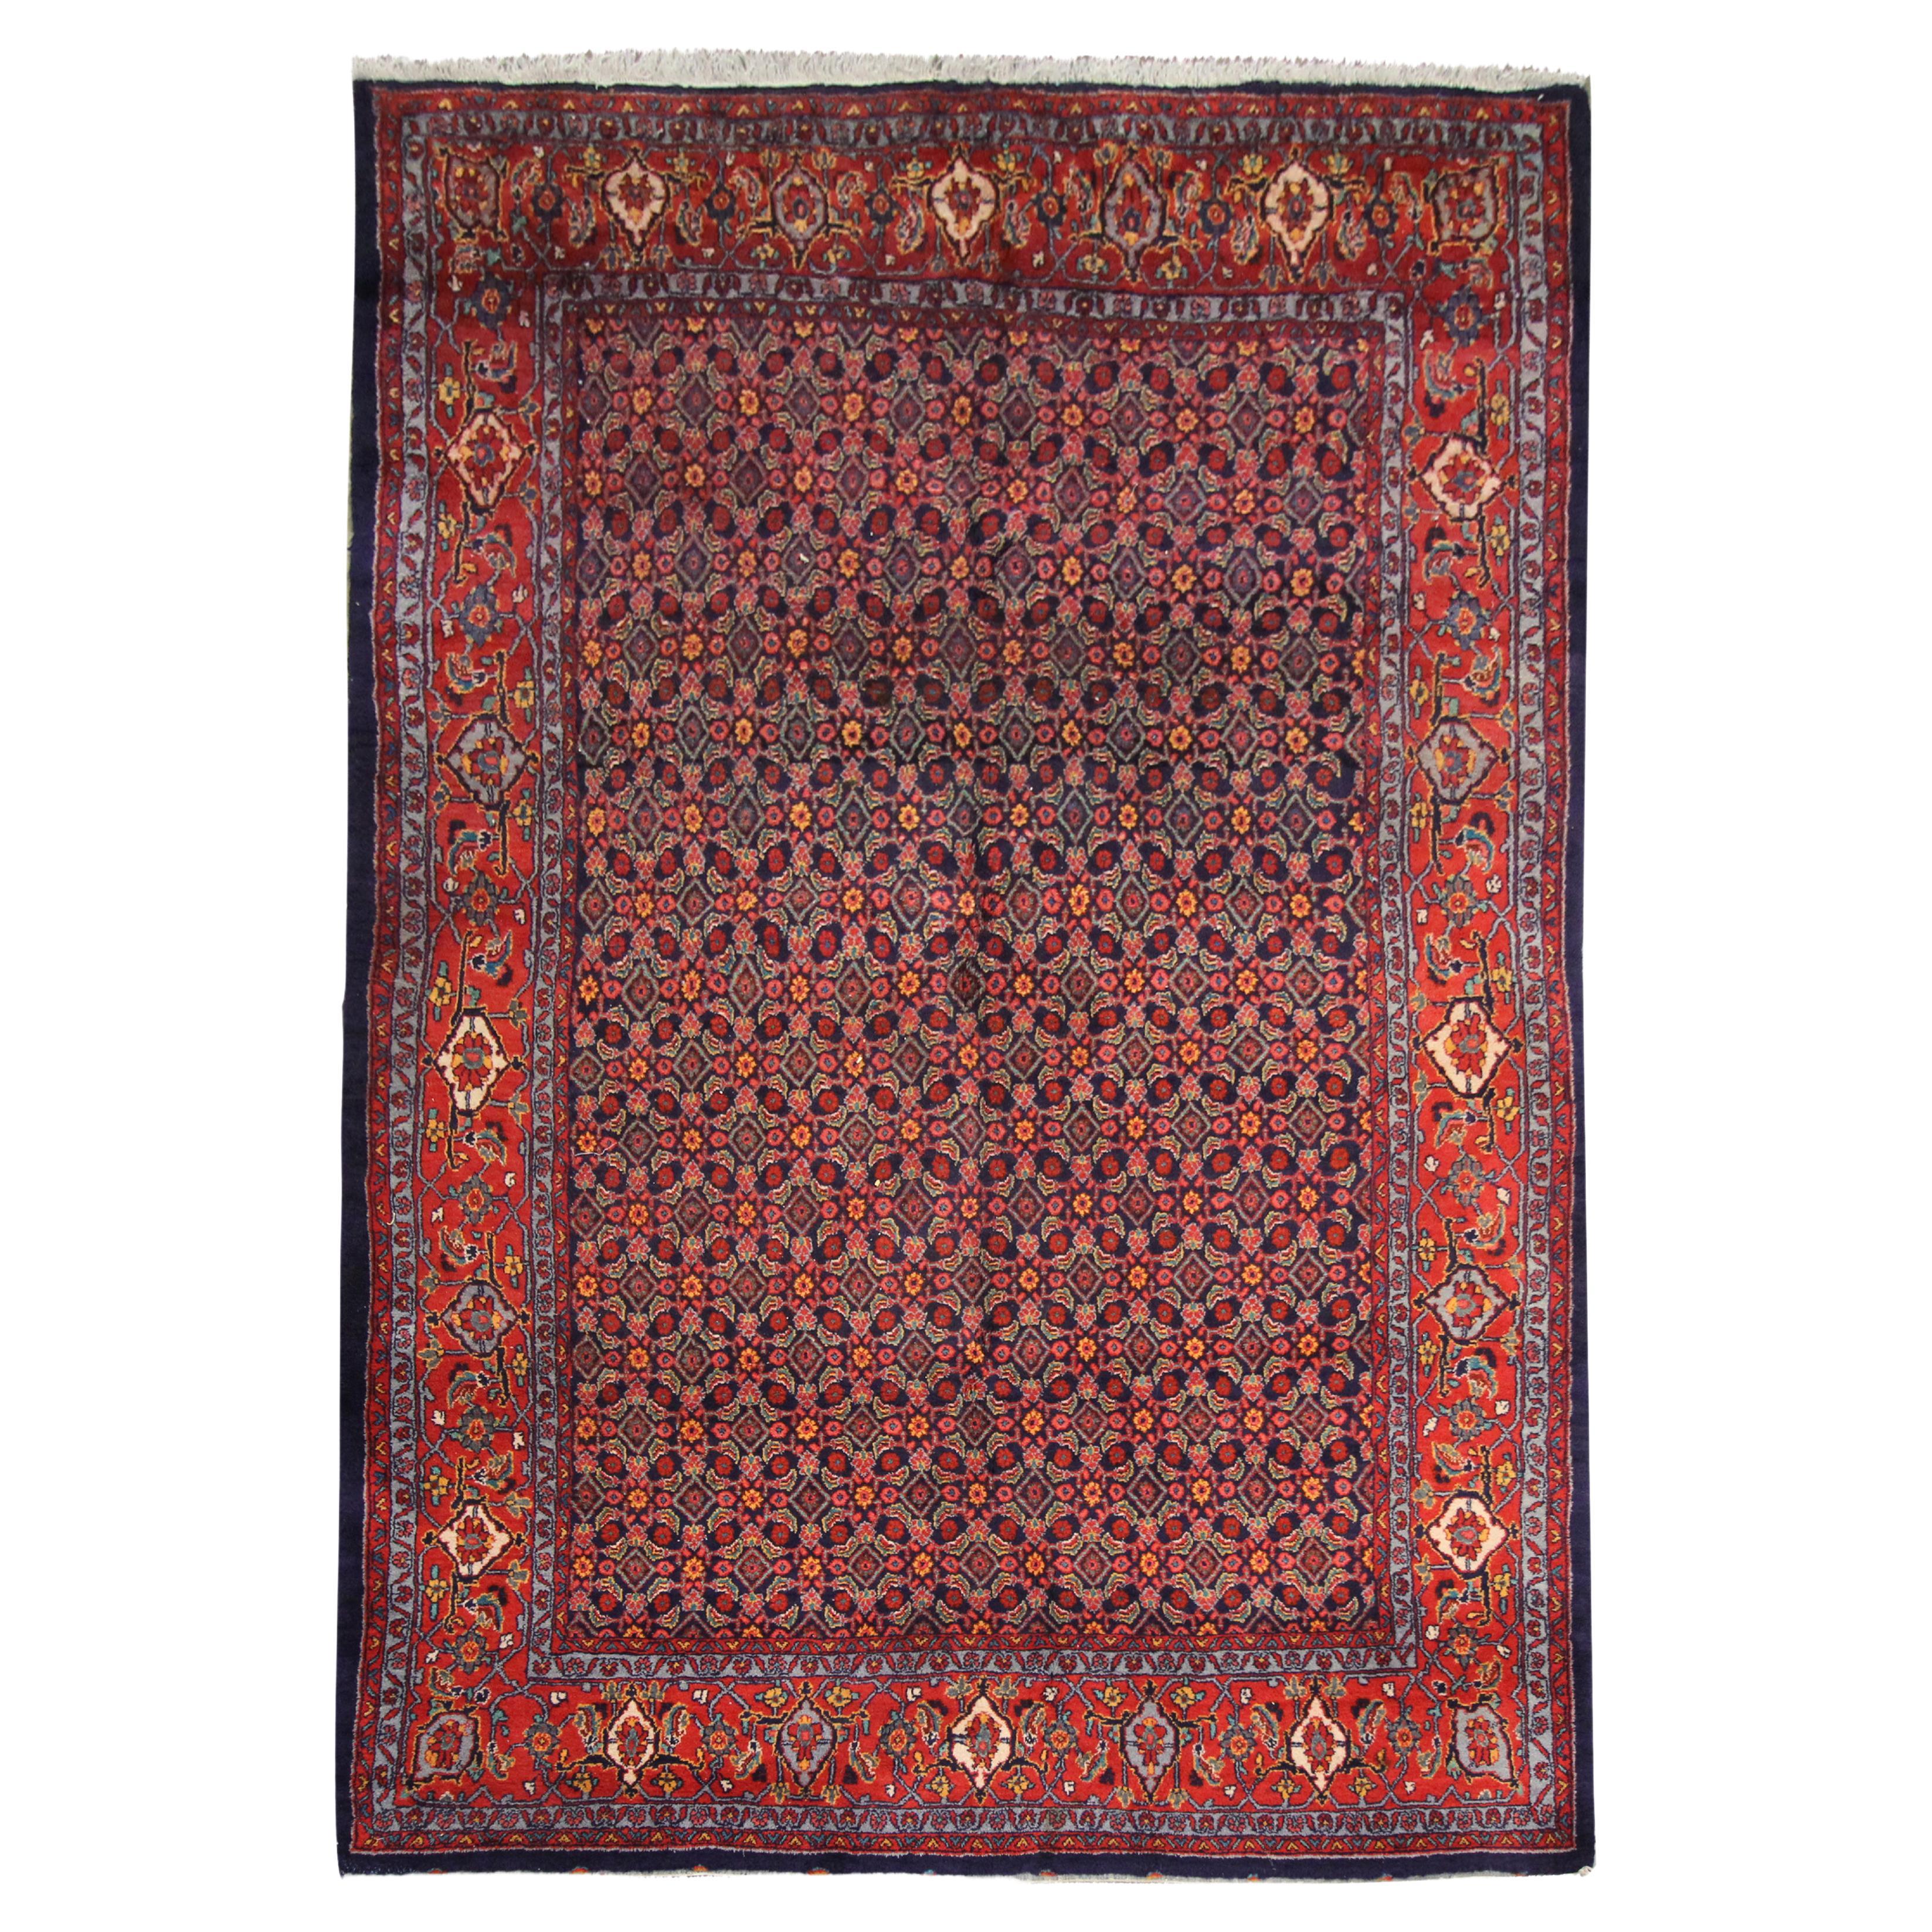 All over Red Oriental Area Rug Handmade Traditional Geometric Carpet